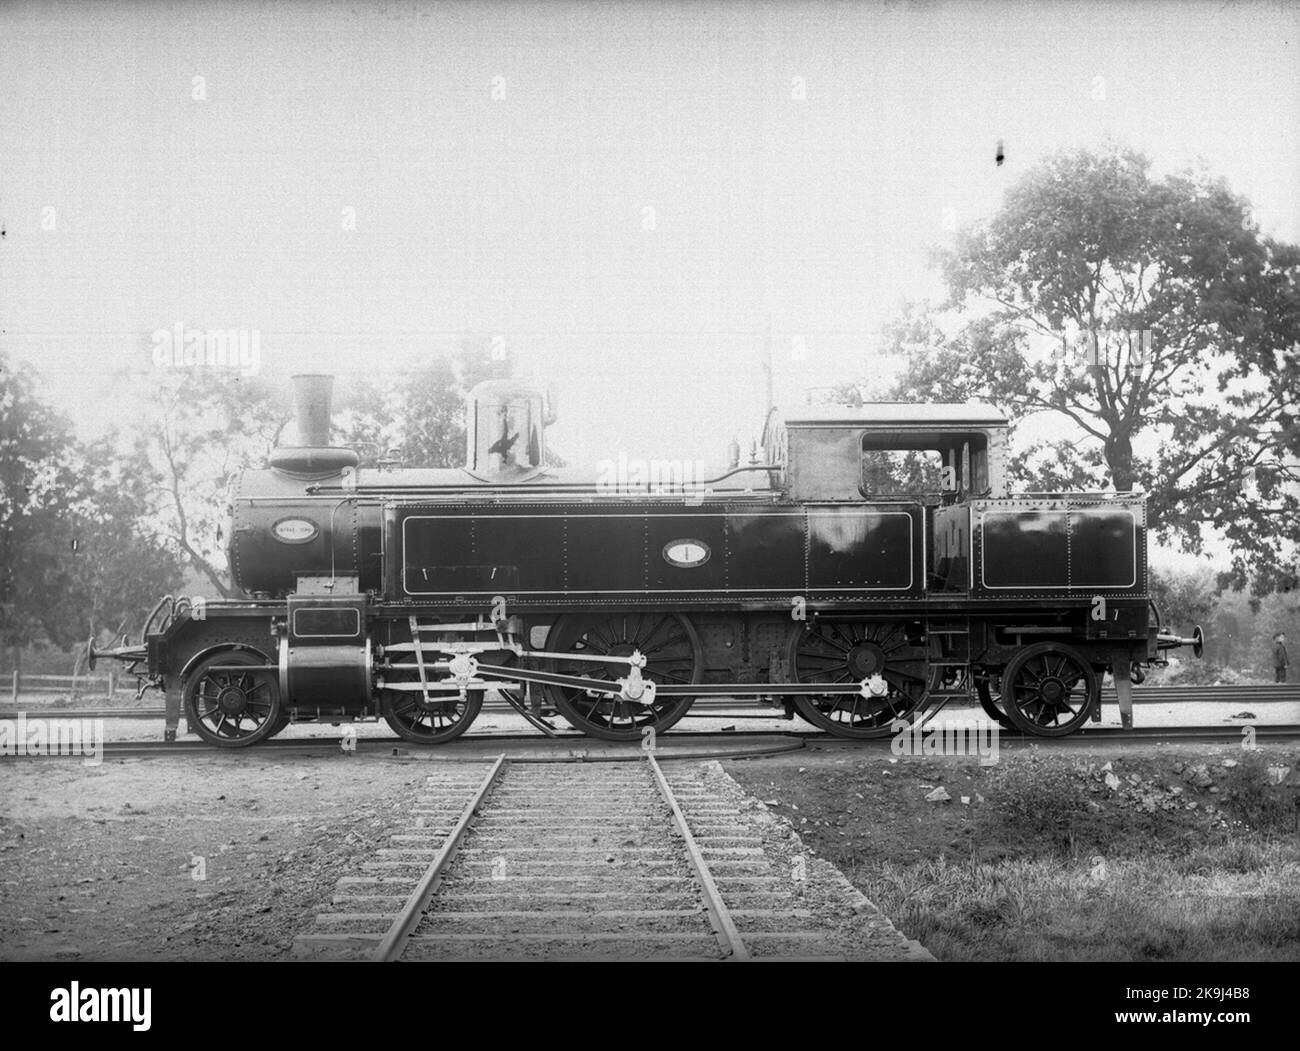 SNJ LOK 1. Delivery photo. Steam locomotive on the turntable. A compounlok. The locomotive was manufactured by Nohab. Was slipped in 1936. Stock Photo